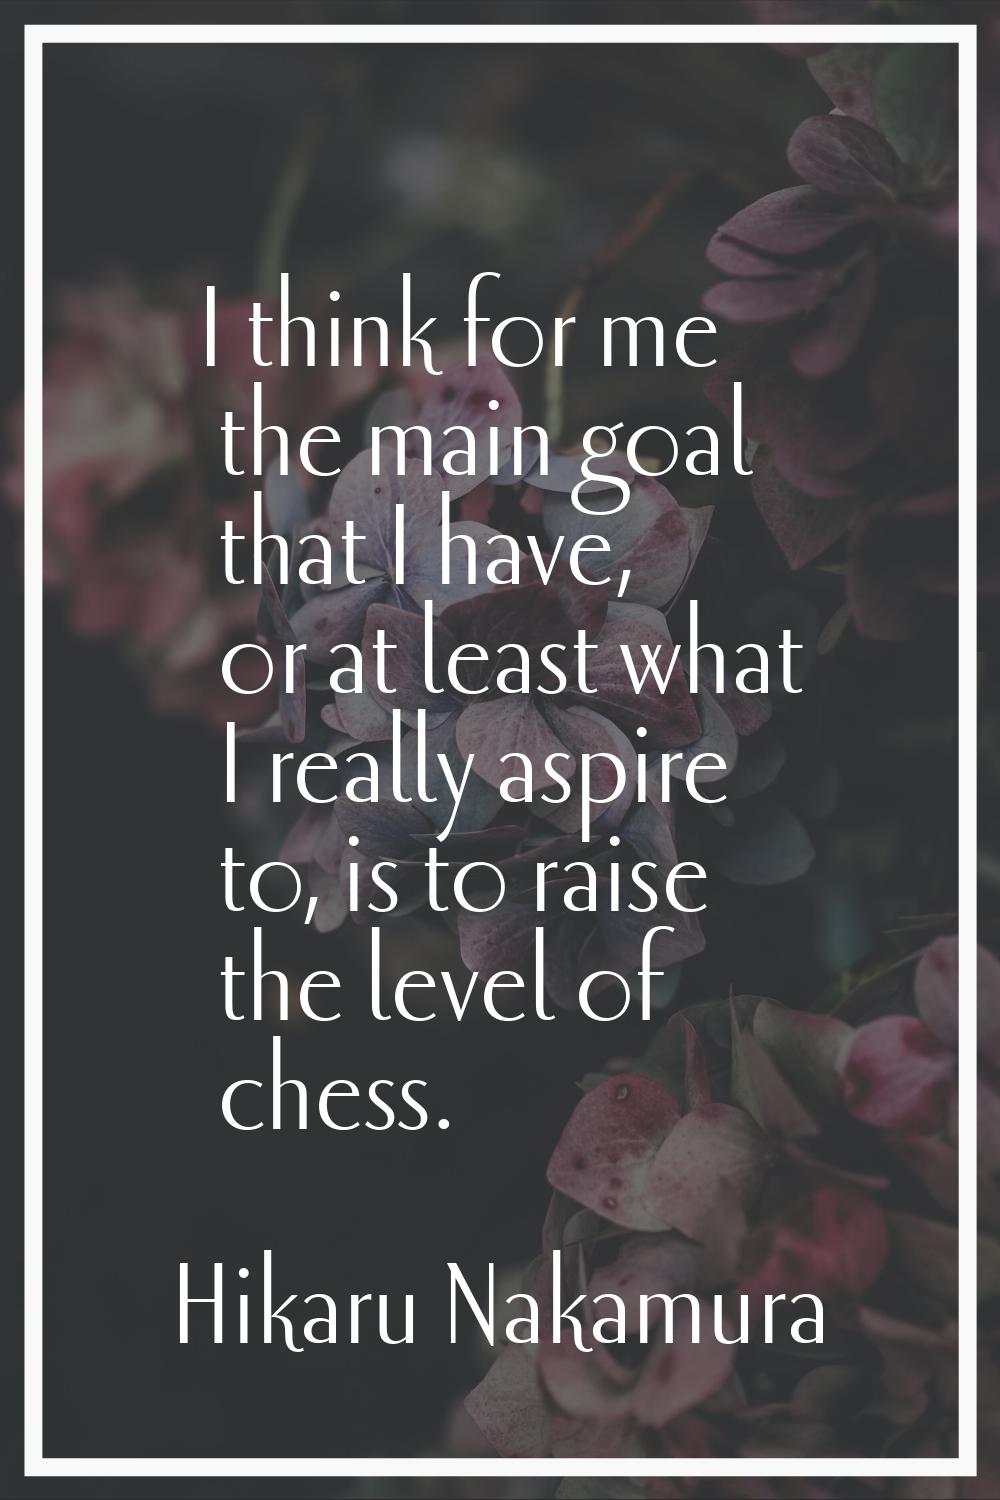 I think for me the main goal that I have, or at least what I really aspire to, is to raise the leve